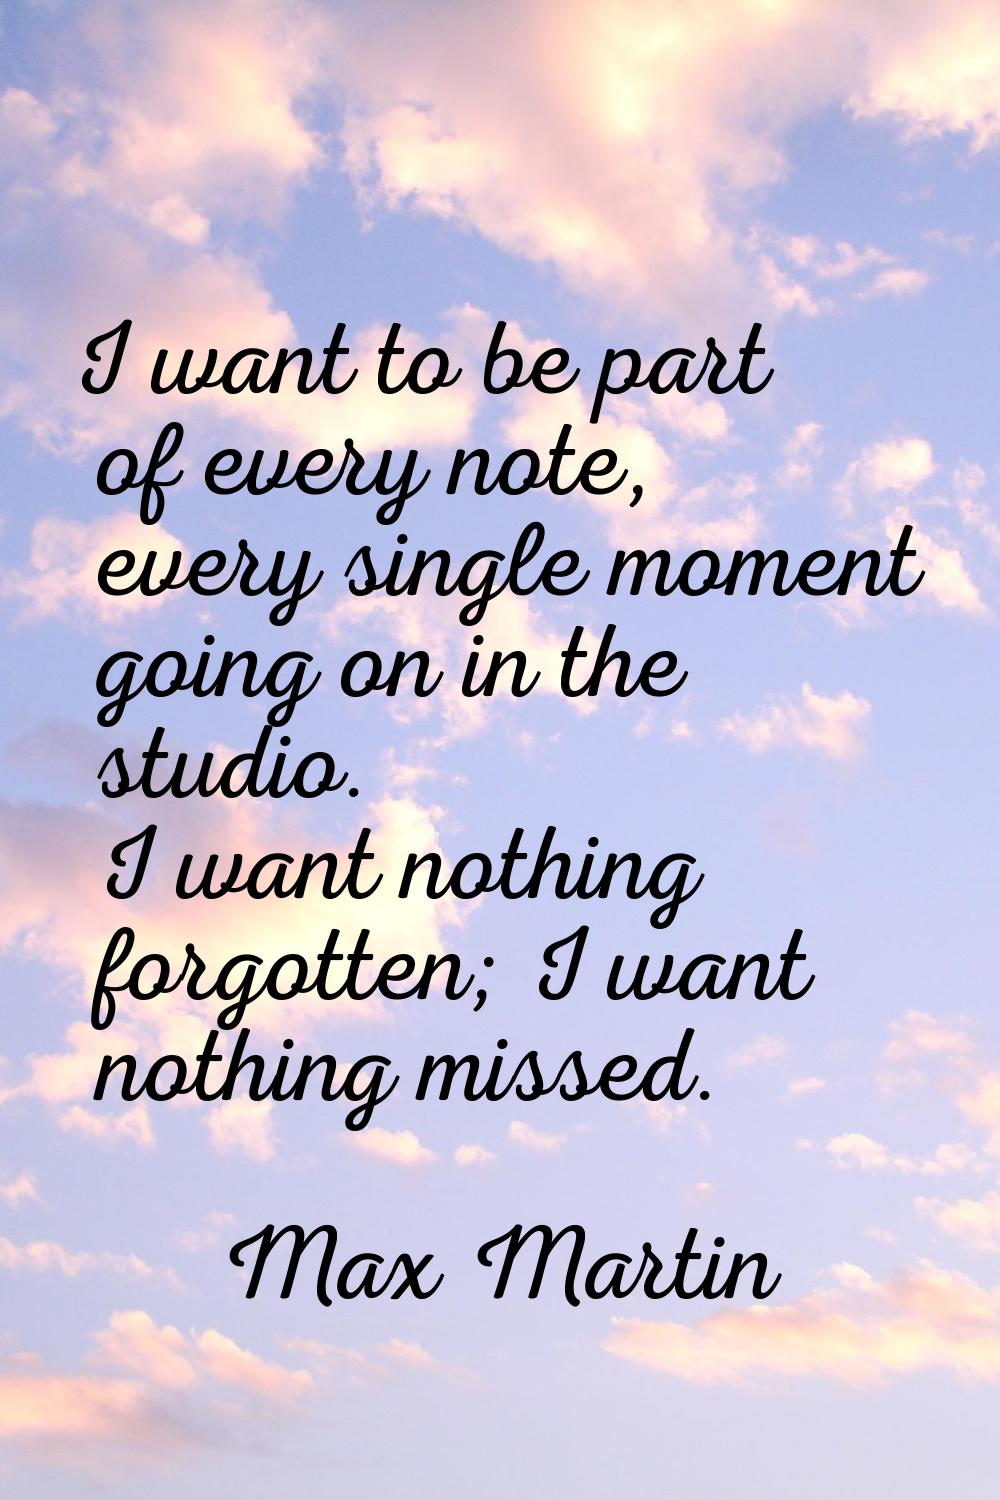 I want to be part of every note, every single moment going on in the studio. I want nothing forgott